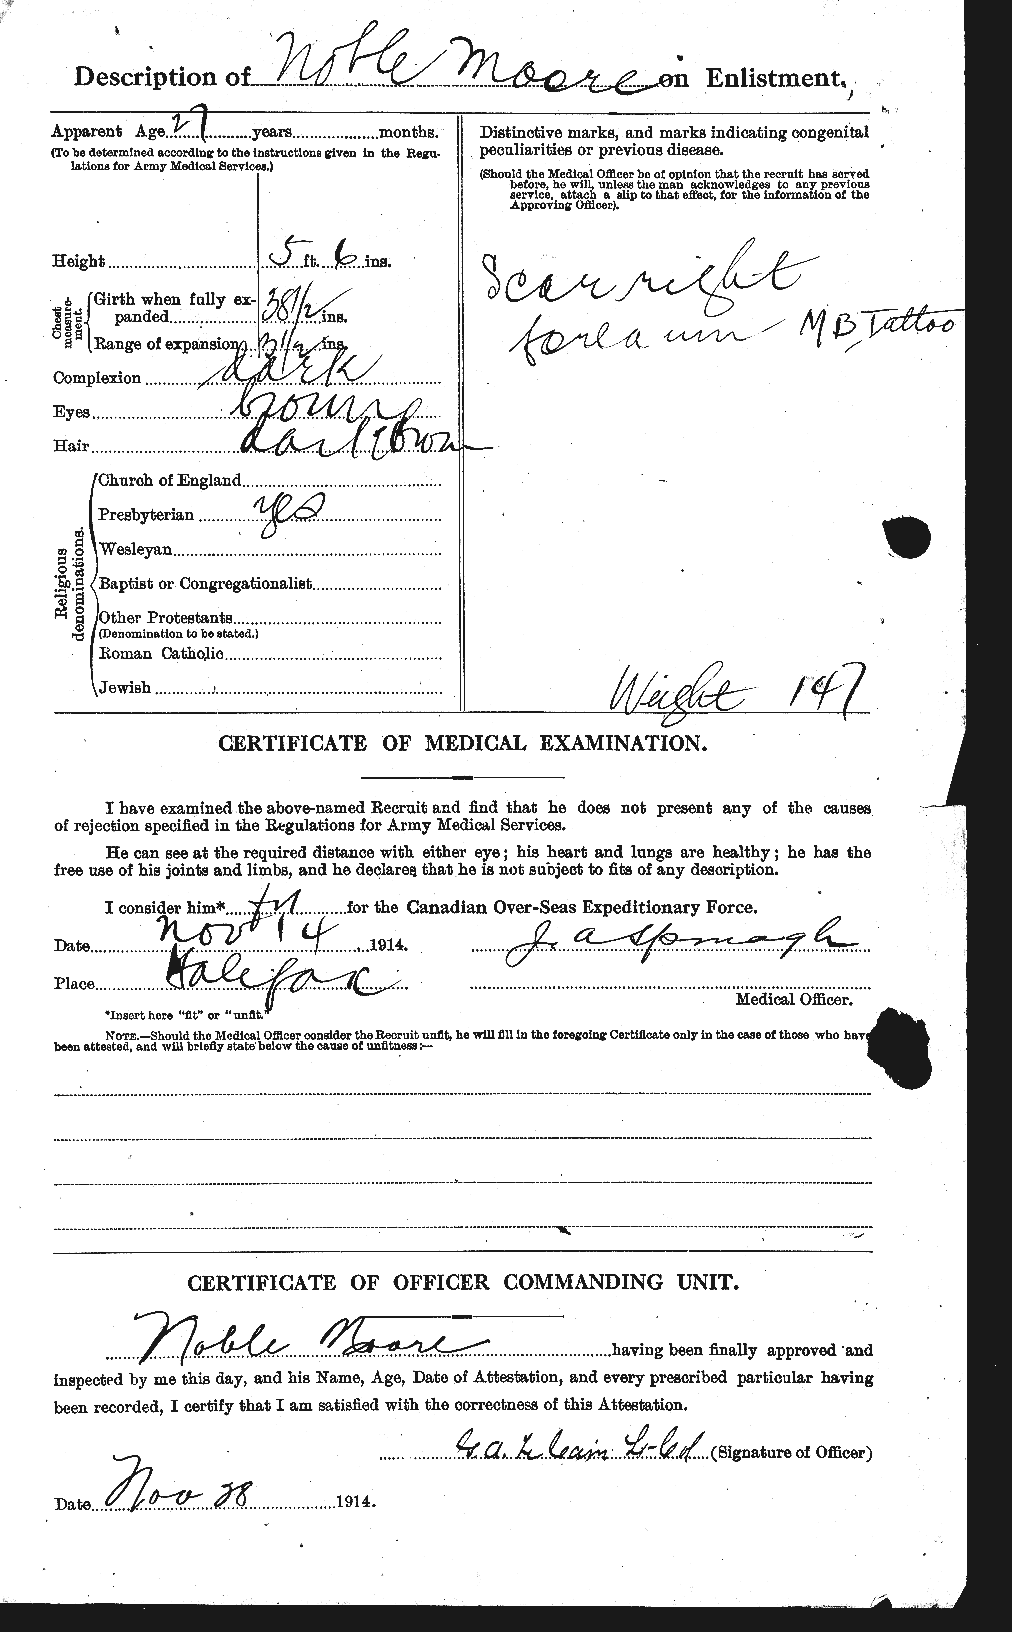 Personnel Records of the First World War - CEF 503456b